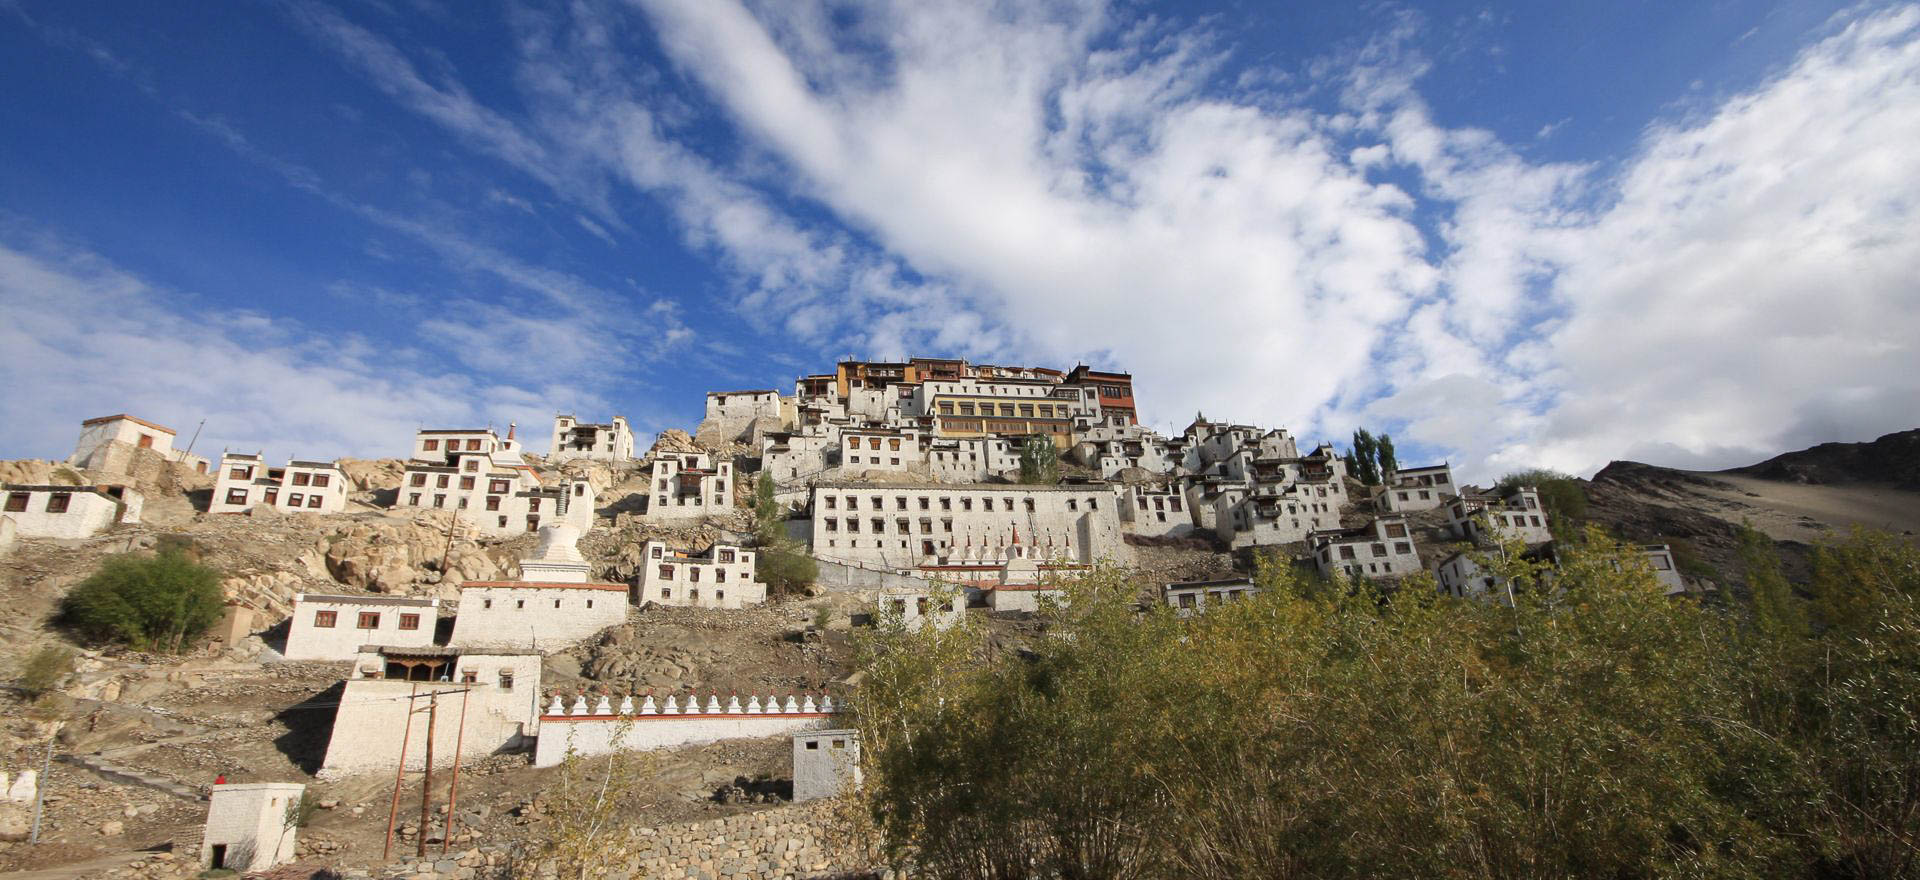 Buddhist monastery in Leh - India Holidays and Tours